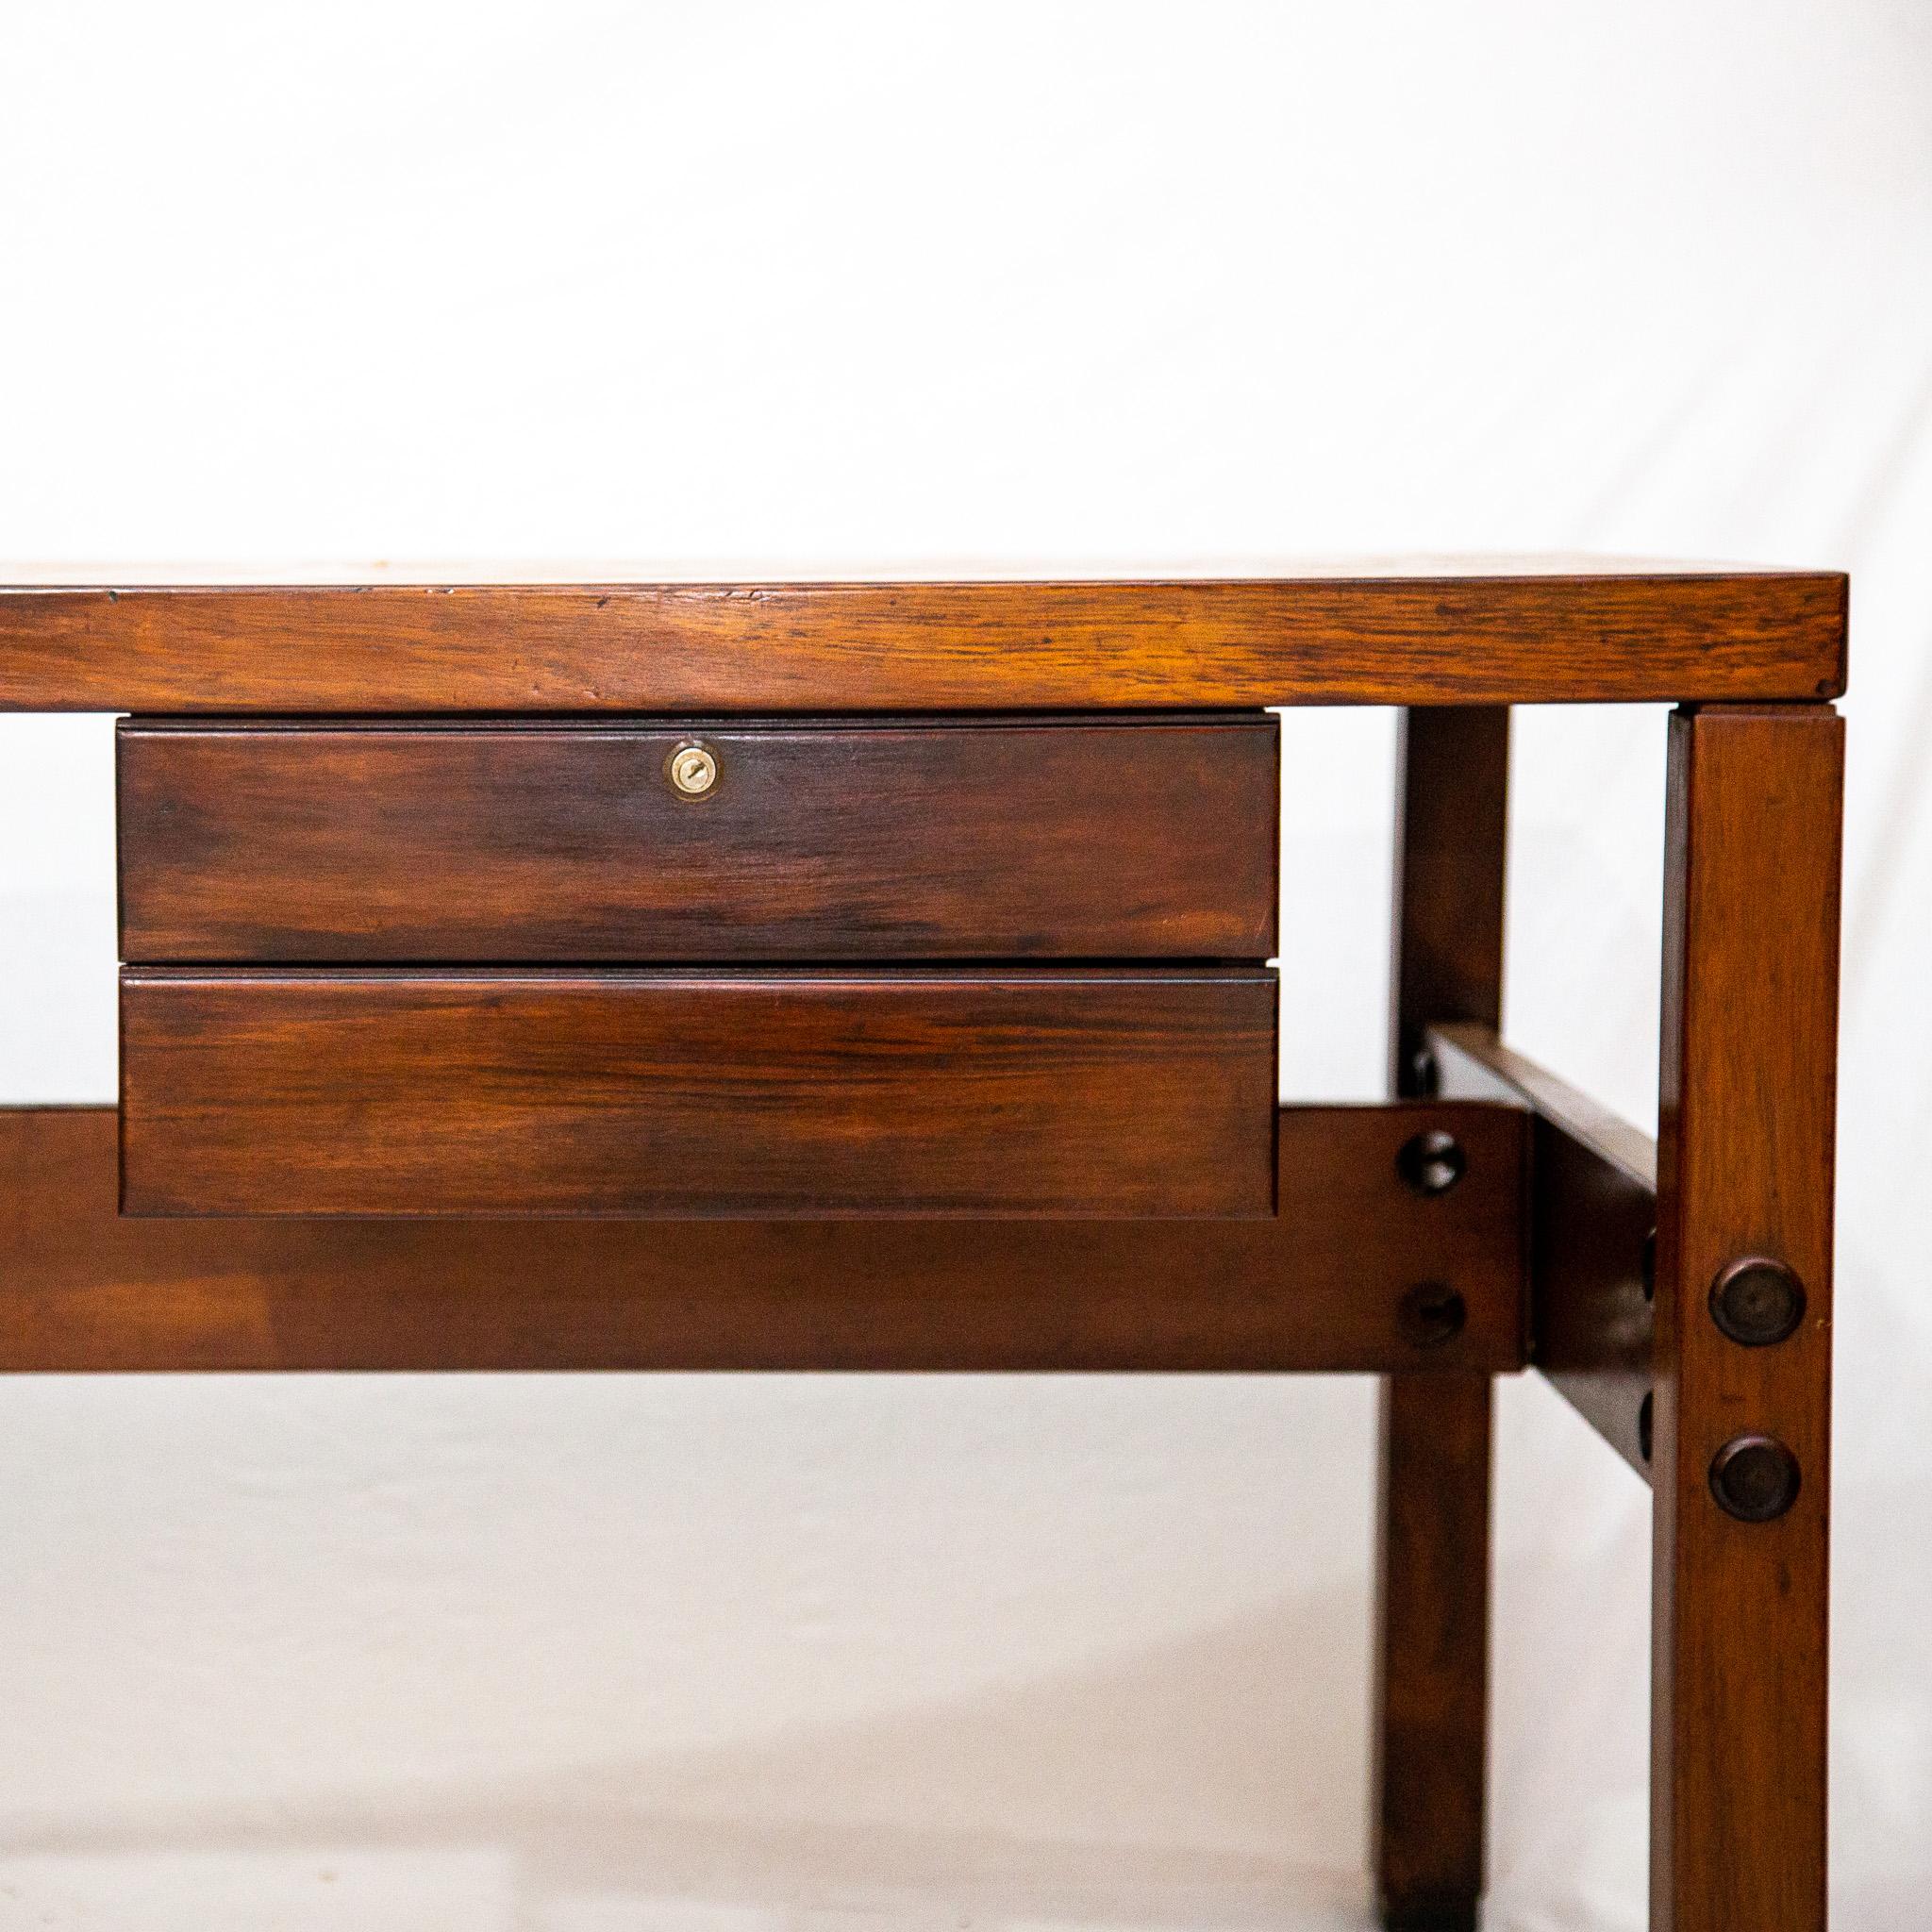 Wood Brazilian Modern Desk in Hardwood with Floating Drawers, Sergio Rodrigues, 1960s For Sale